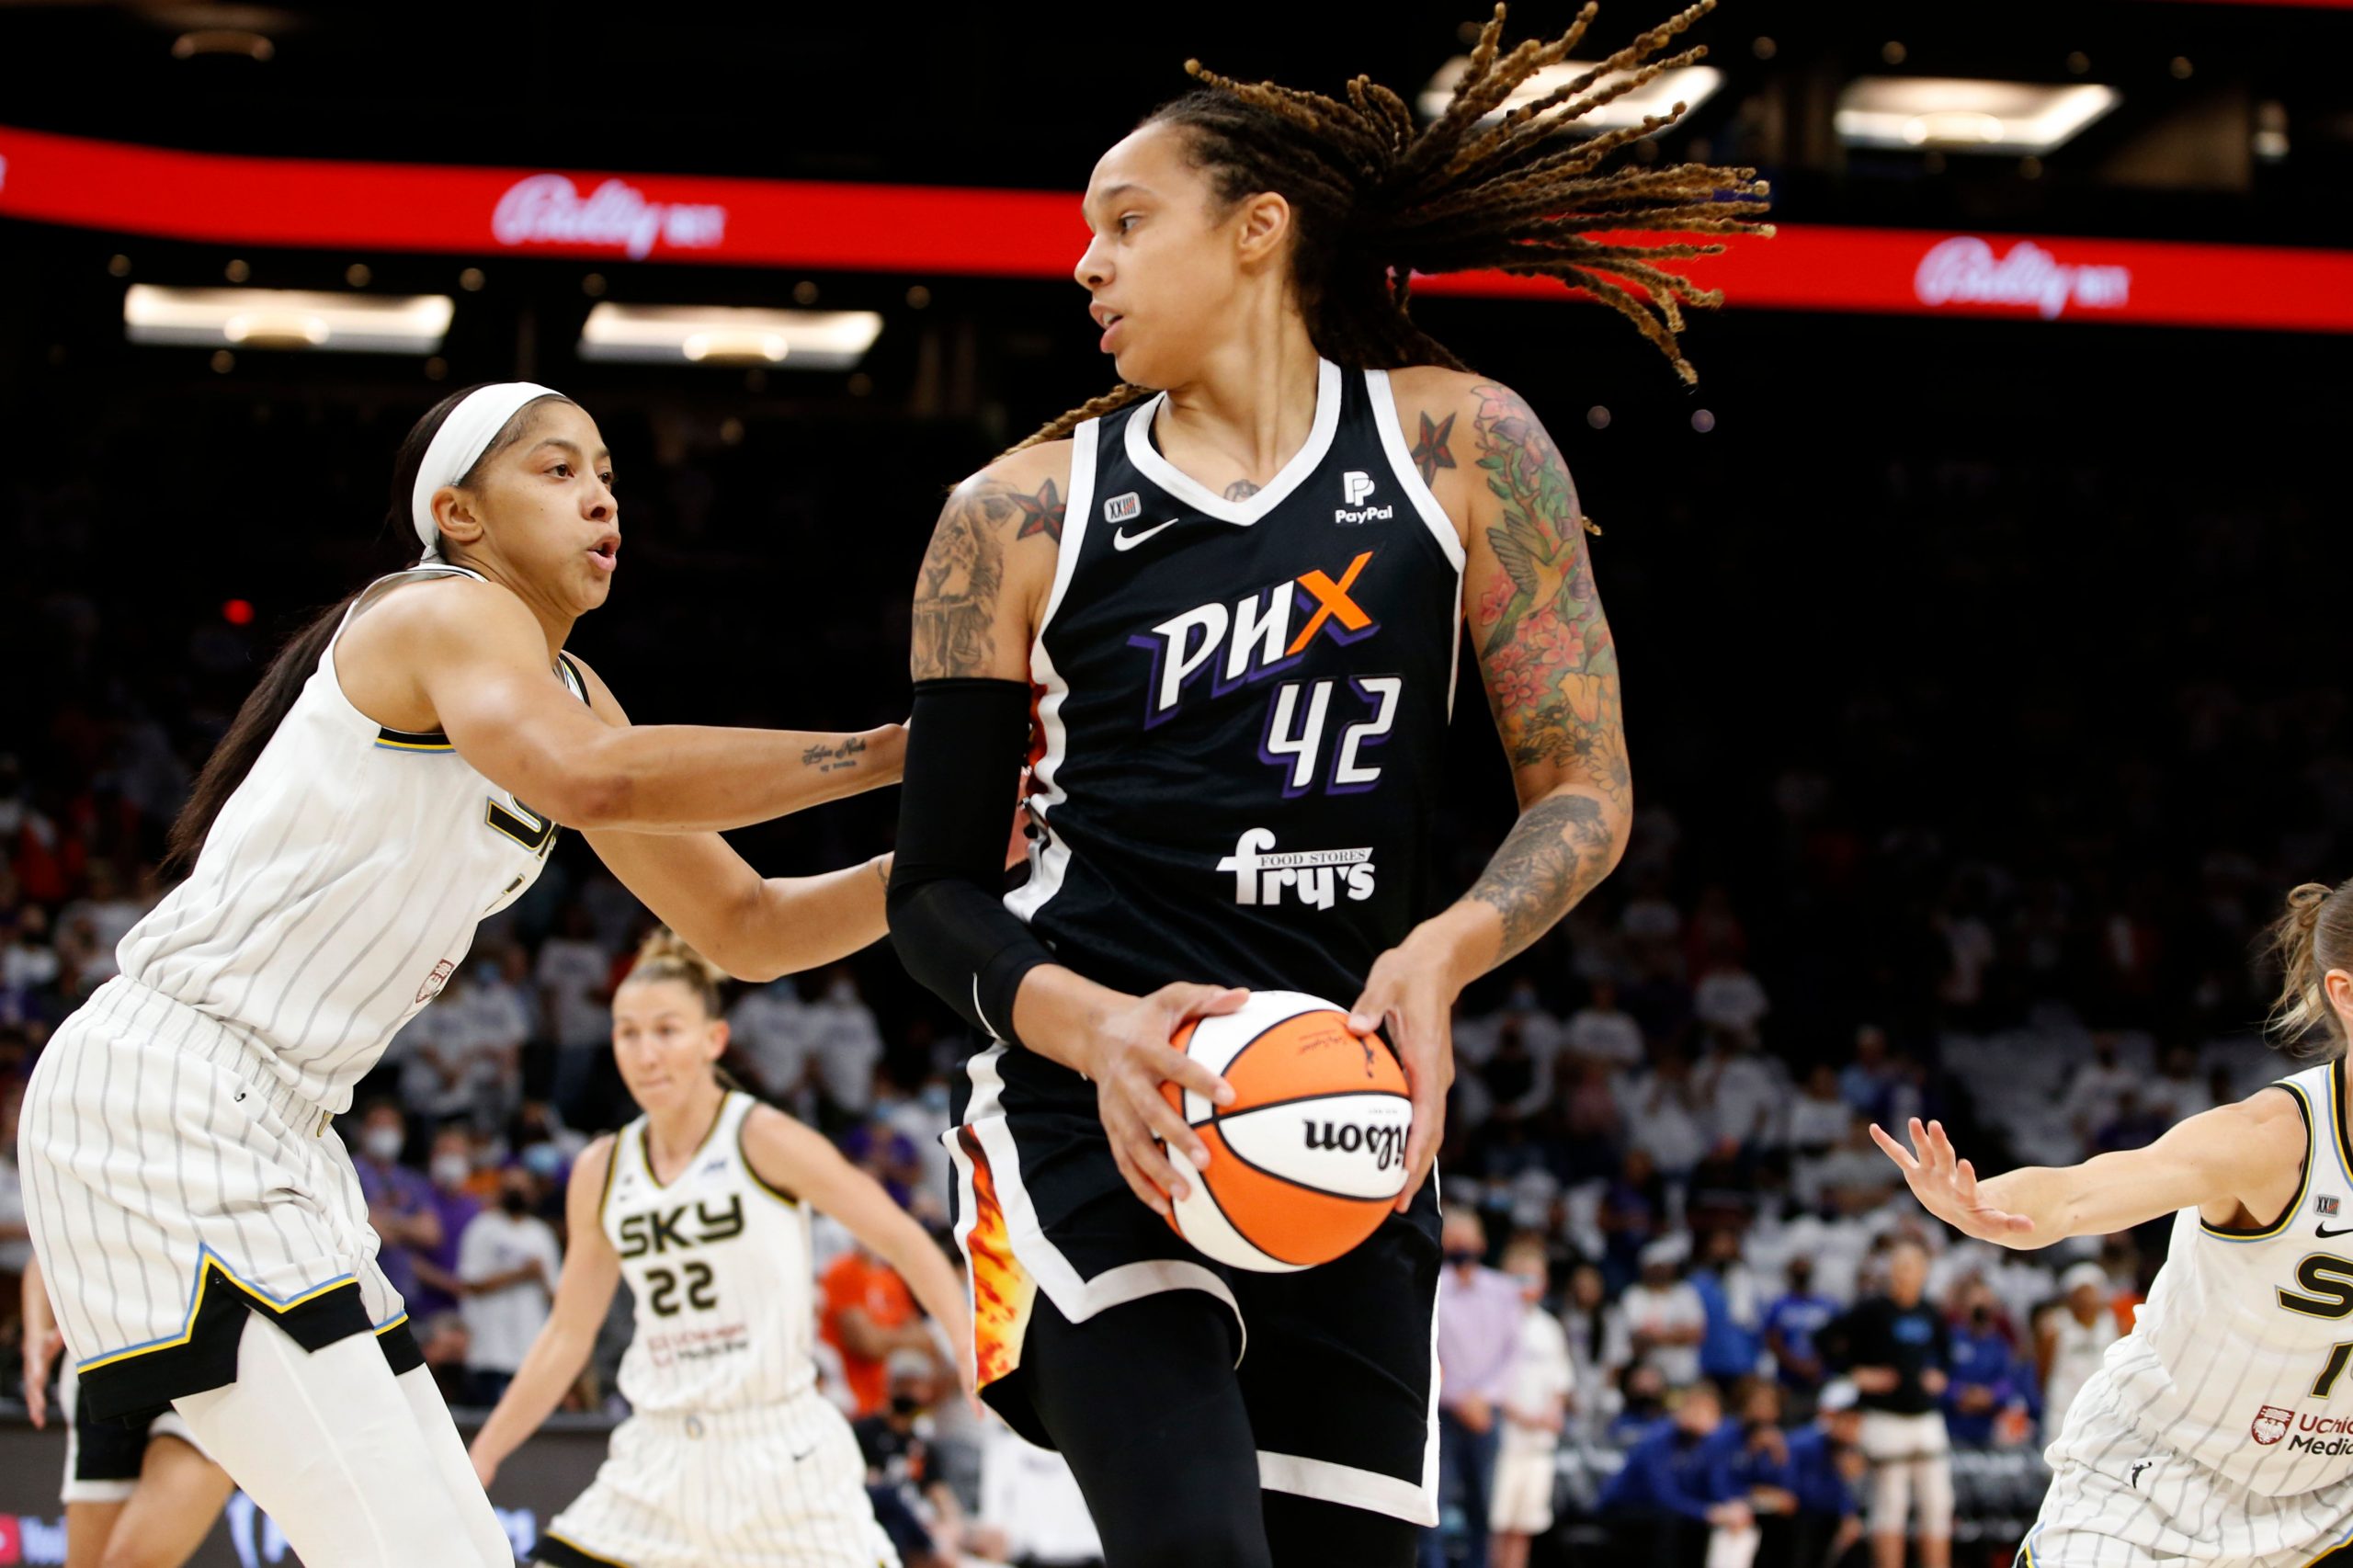 WNBA’s Brittney Griner arrested in Russia on drug charges